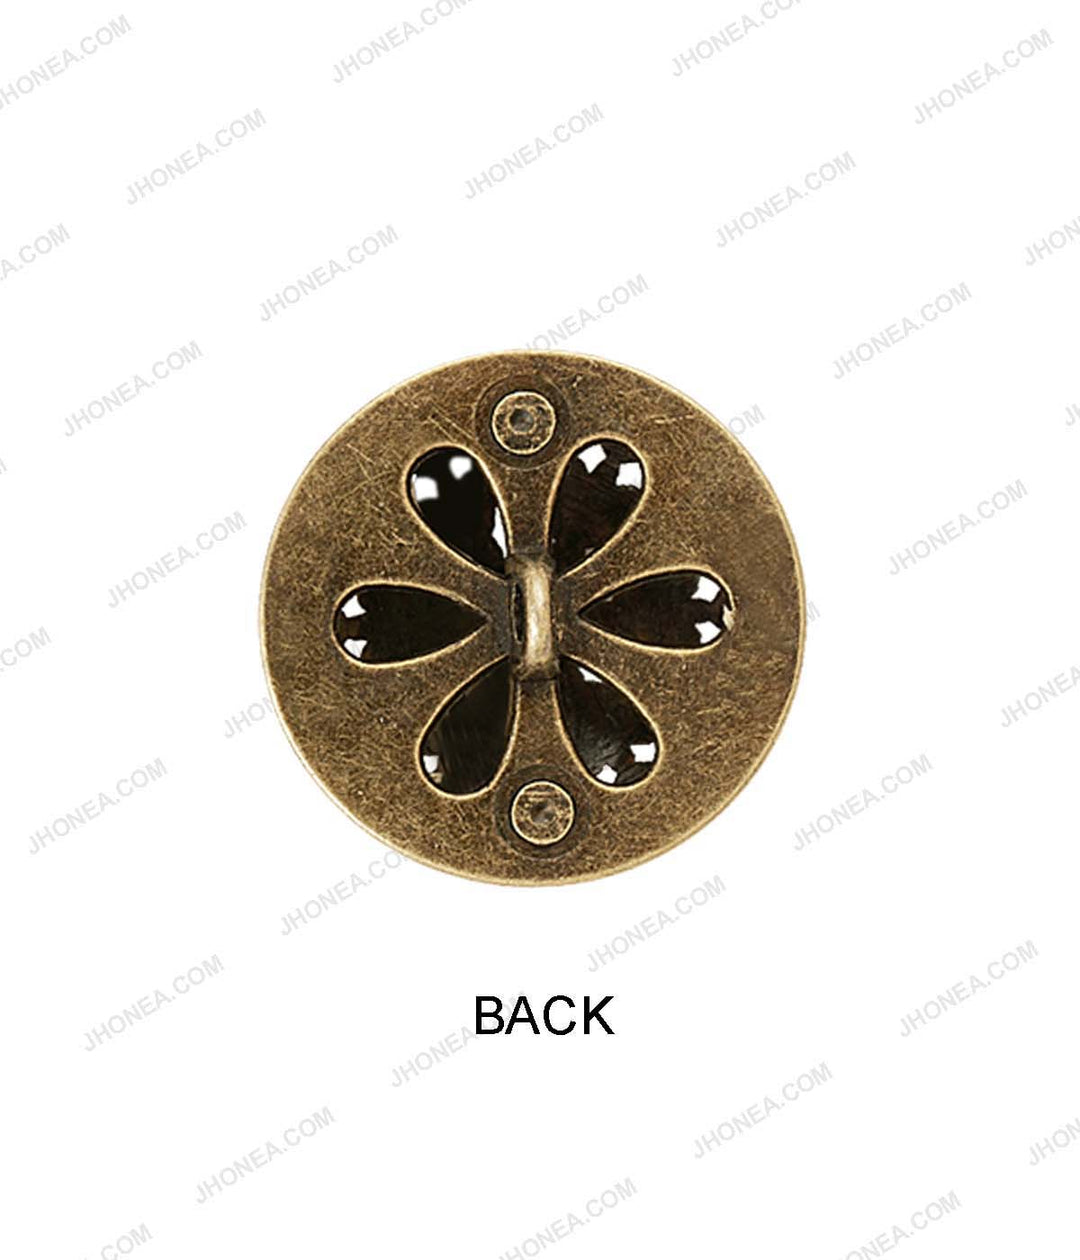 Historic Design Cutwork Antique Brass Dome Surface Buttons